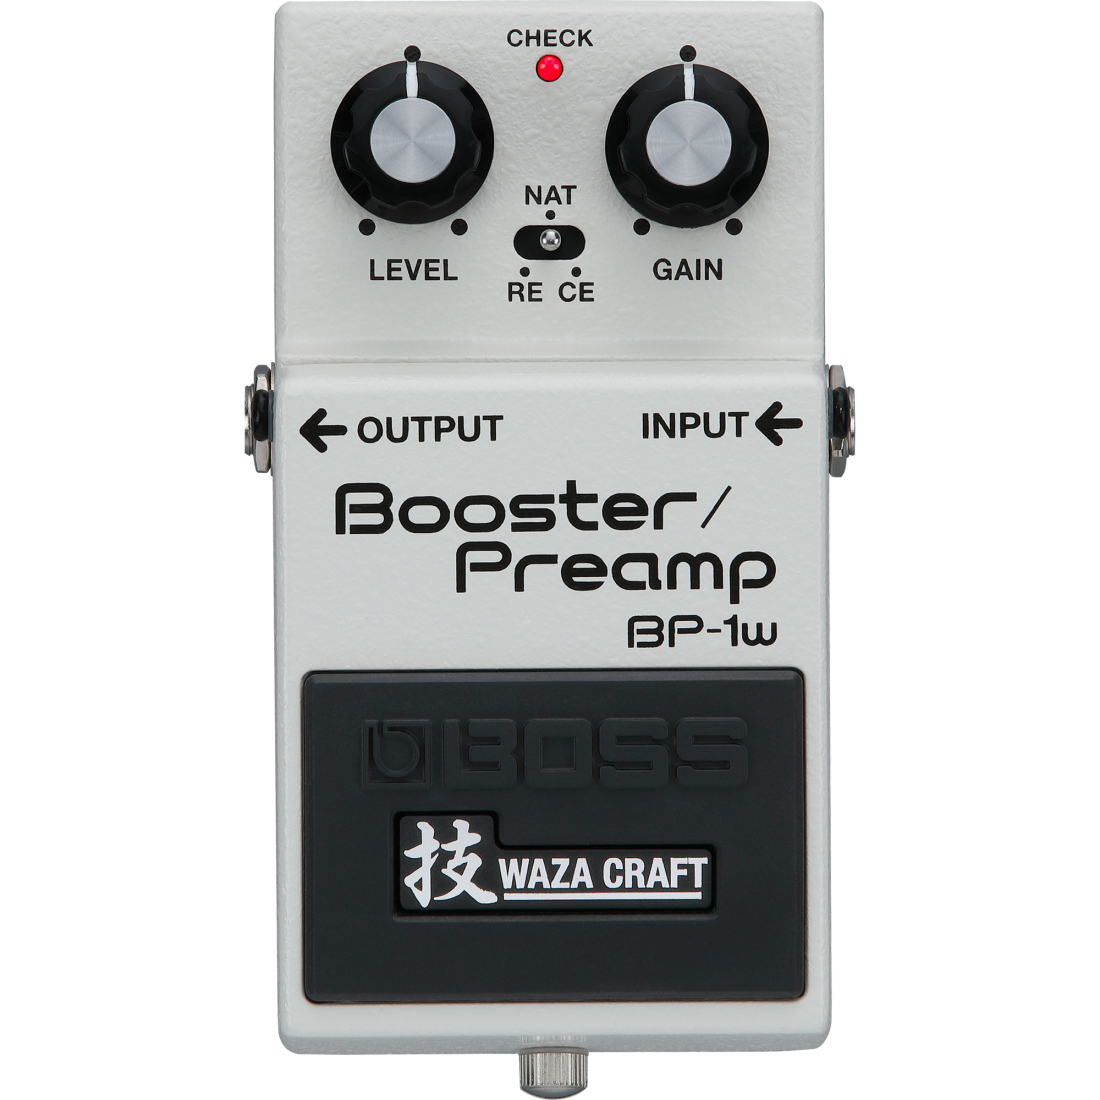 BP-1W Booster/Preamp Pedal